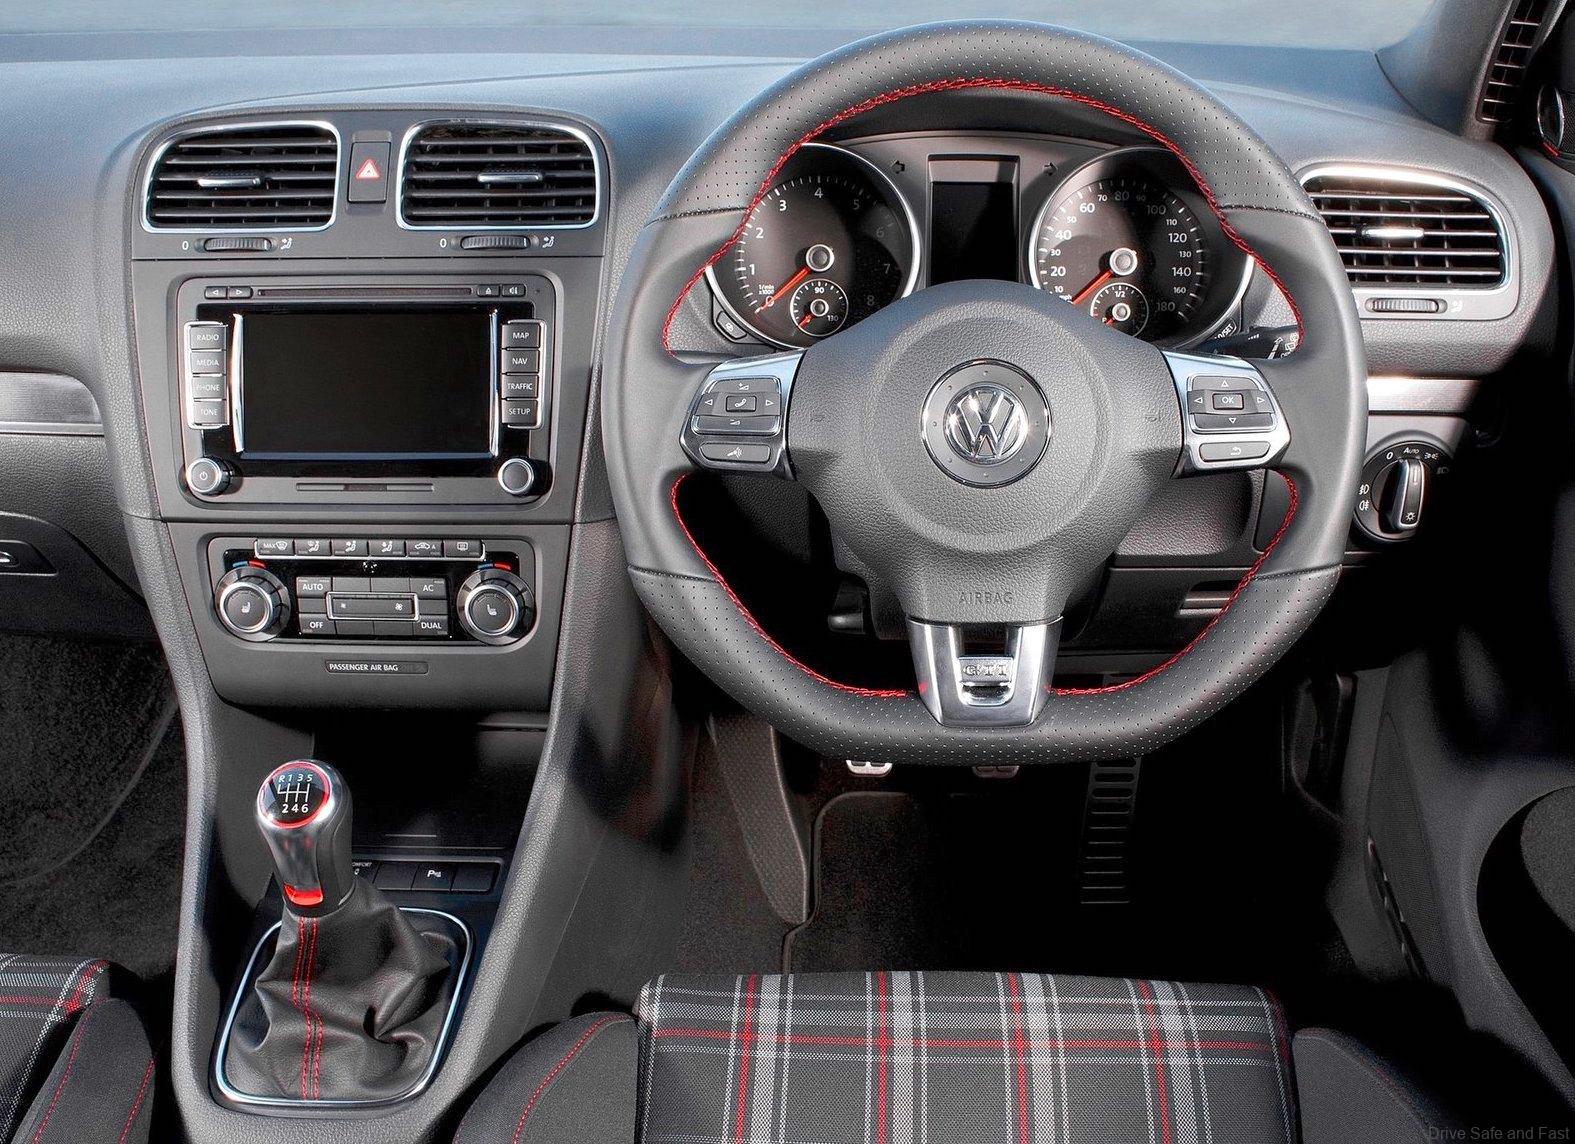 VW Golf GTI Mk6 Used Buyer Guide Over A Brand New GTI